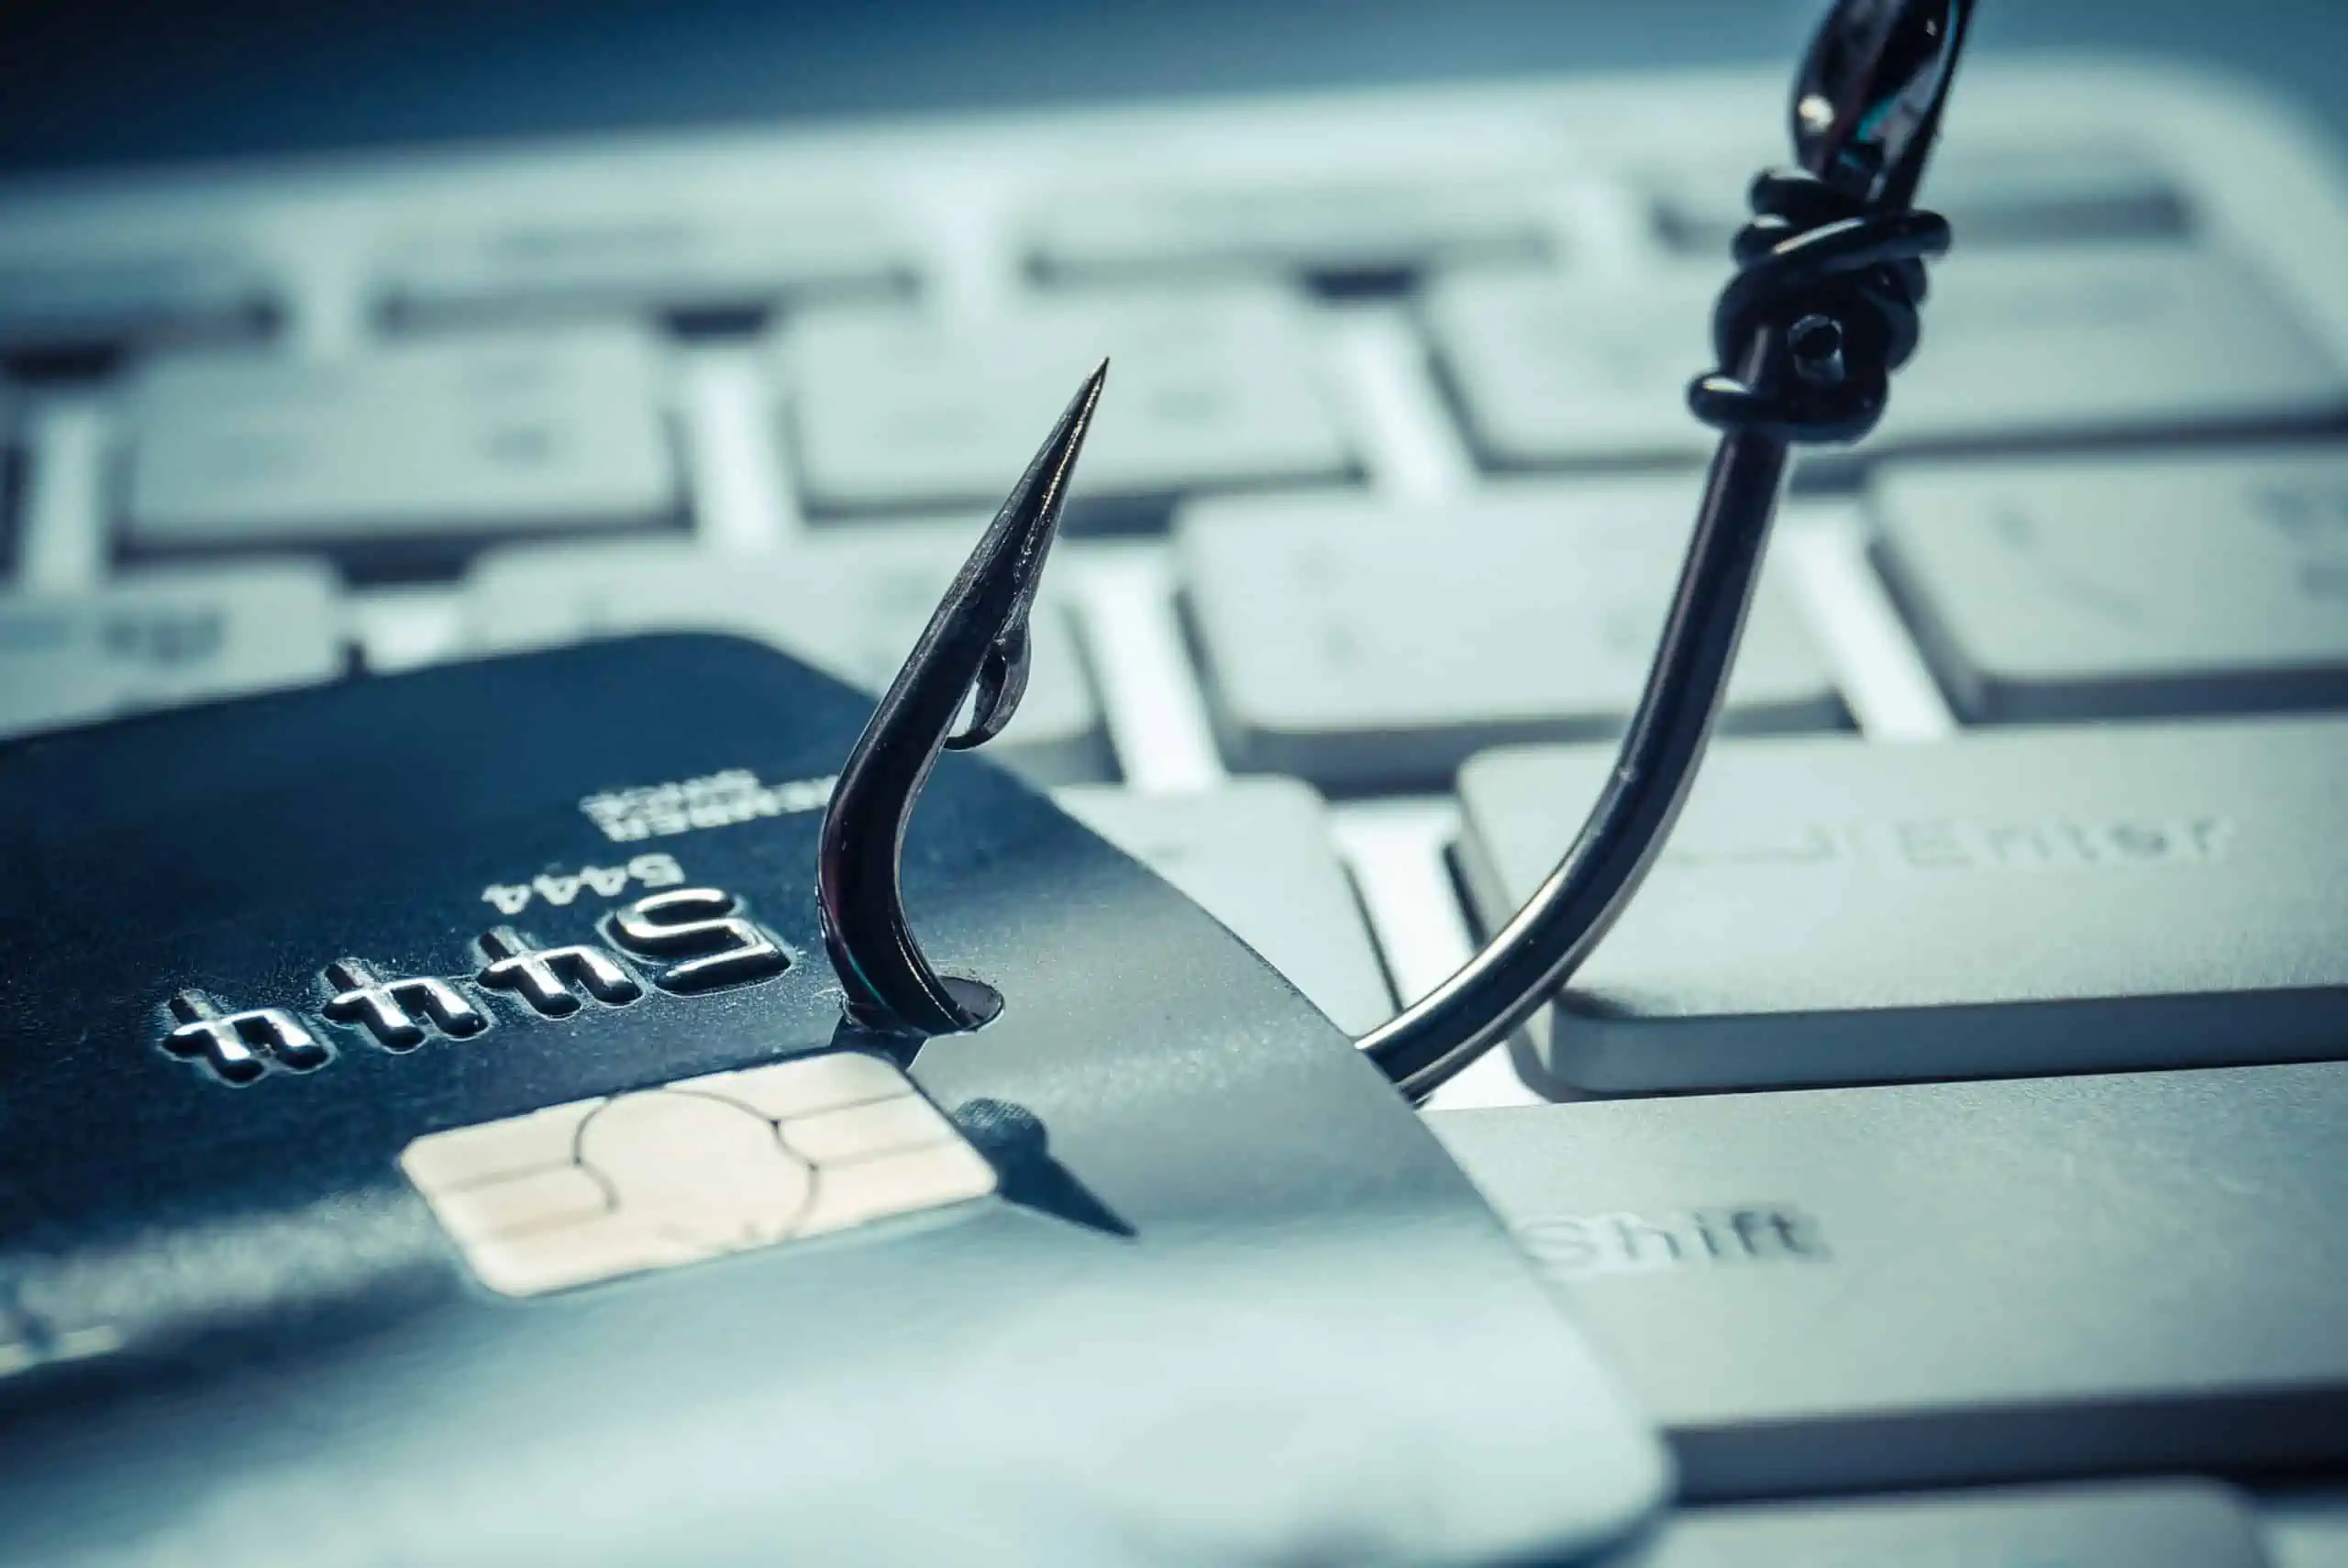 Phishing scam symbolized by a fishing hook put through a credit card sitting on a computer keyboard.